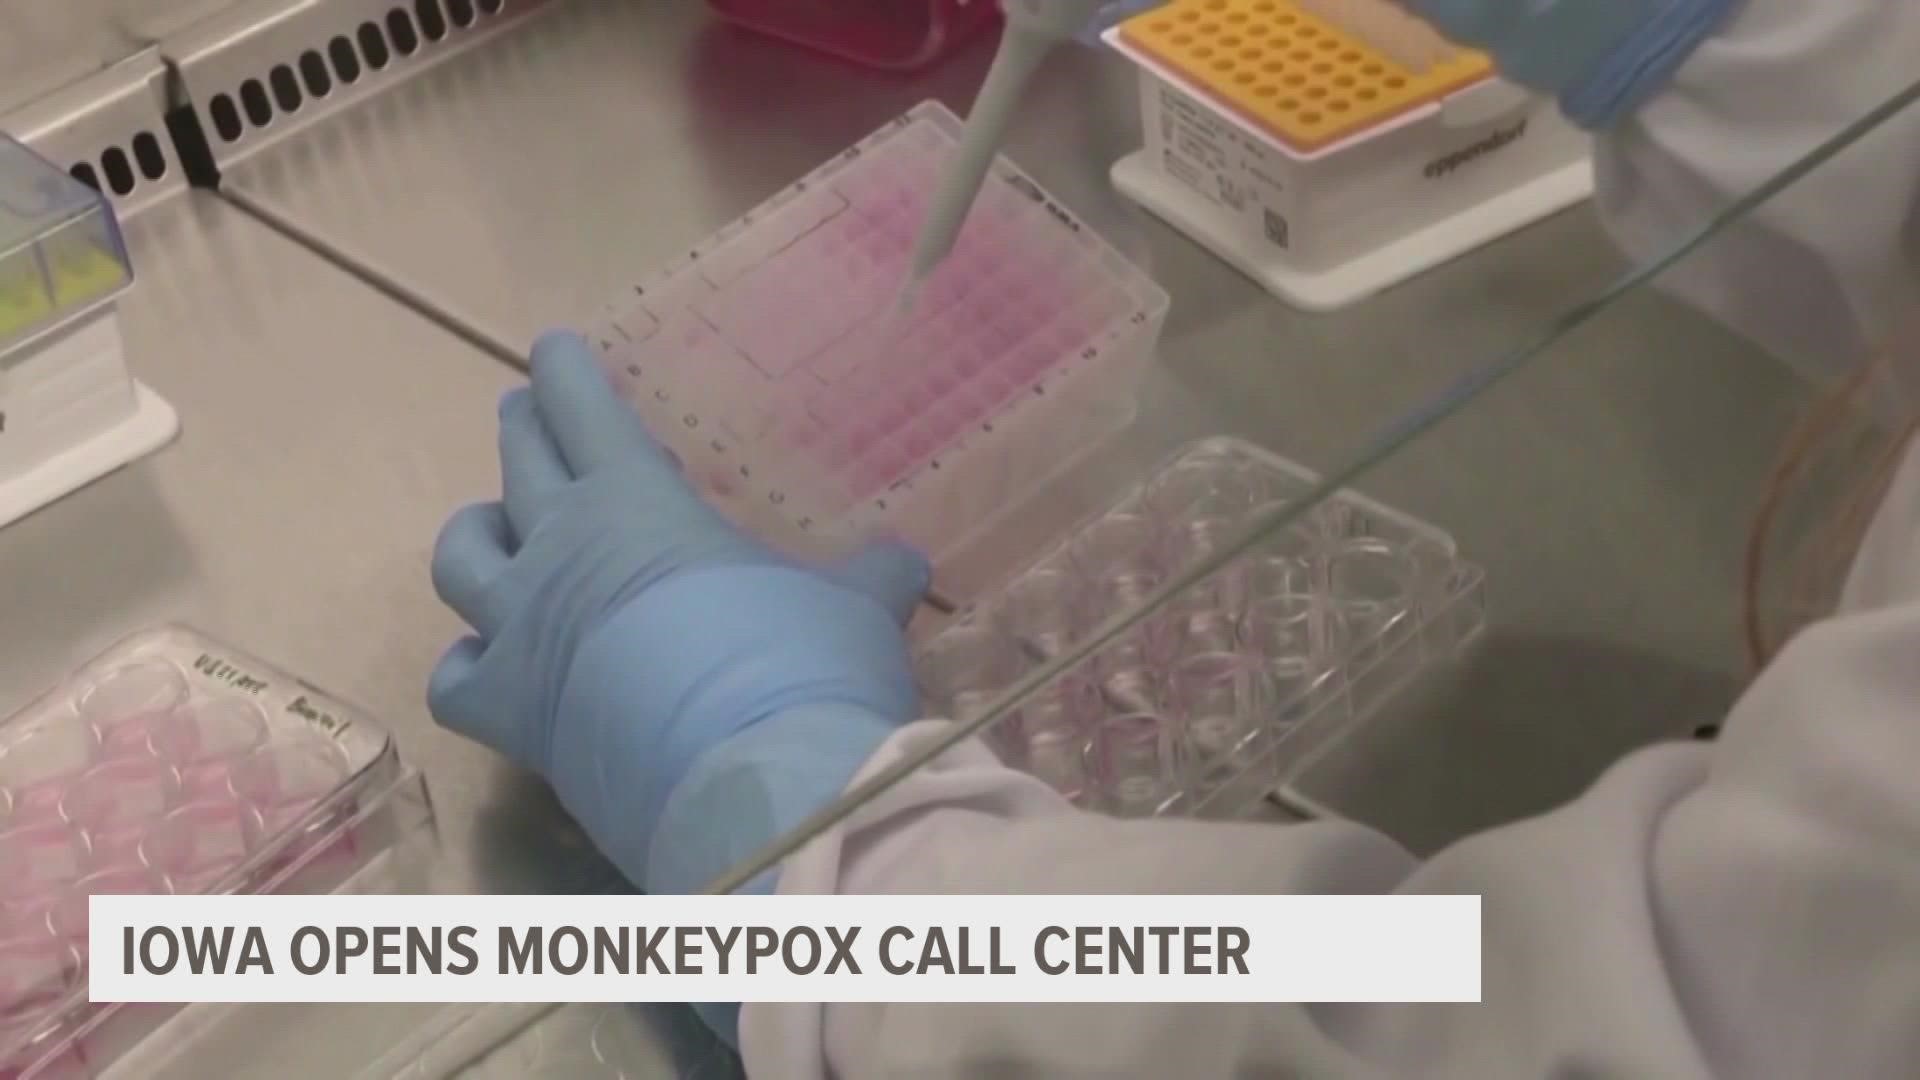 Iowa Department of Health and Human Services created a call center to help deal with the questions surrounding Monkeypox.